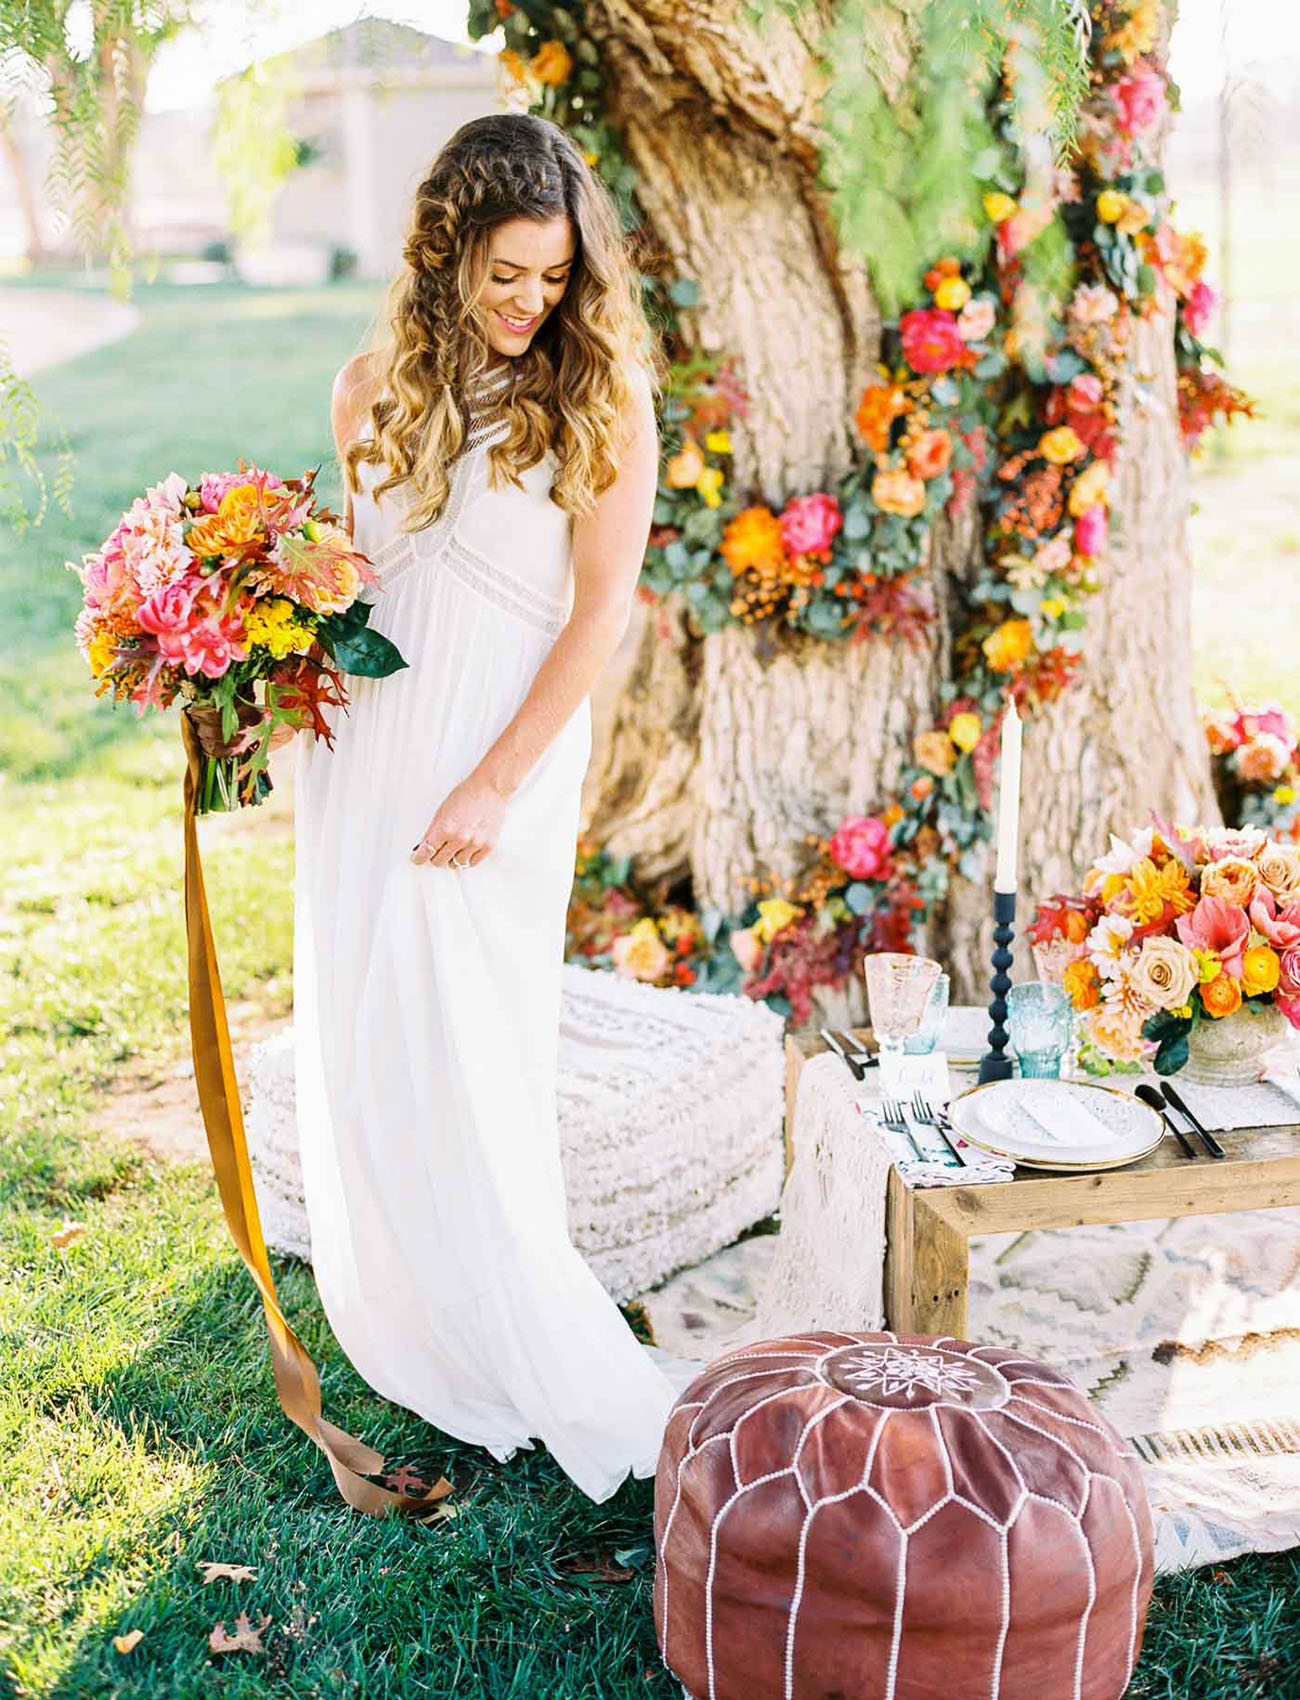 This colorful and vibrant fall wedding shoot is totally different from those trendy moody and dark ones